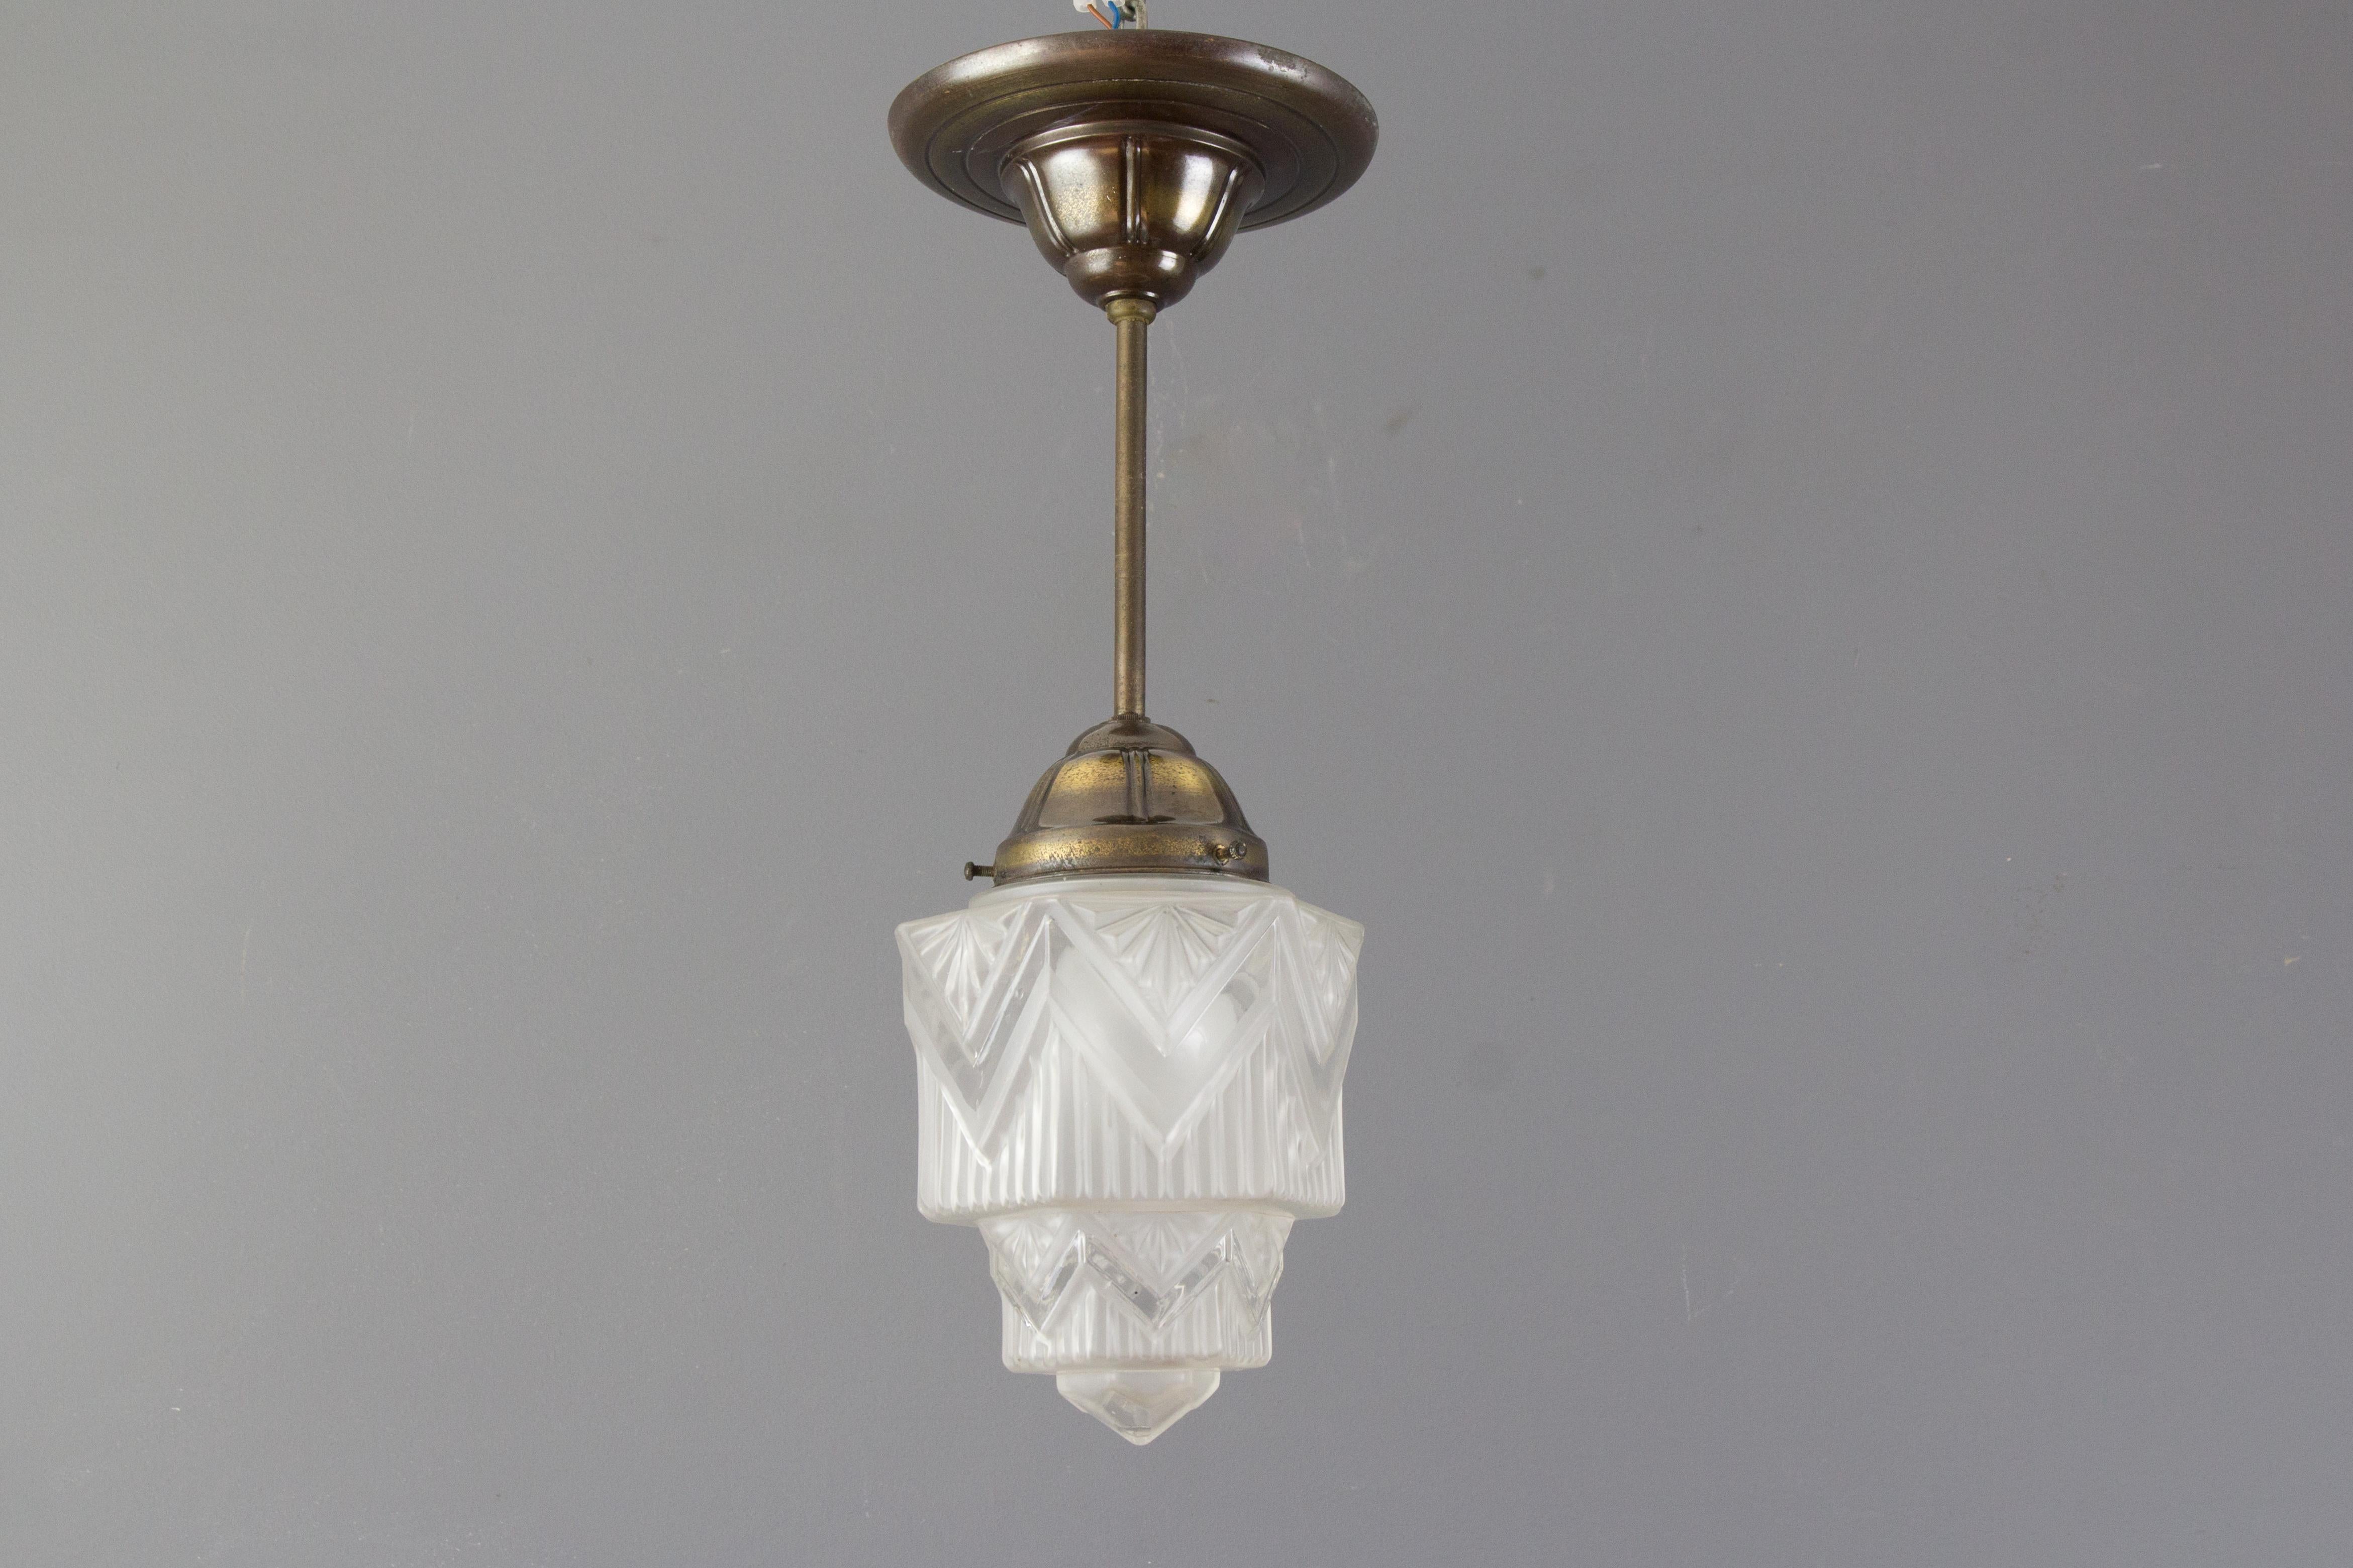 French Art Deco skyscraper ceiling light fixture or pendant with white frosted glass shade, circa 1920s. In good condition, wear consistent with age and use, newly rewired, one socket for E27 light bulb.
Dimensions: Diameter 14 cm / 5.51 in, height